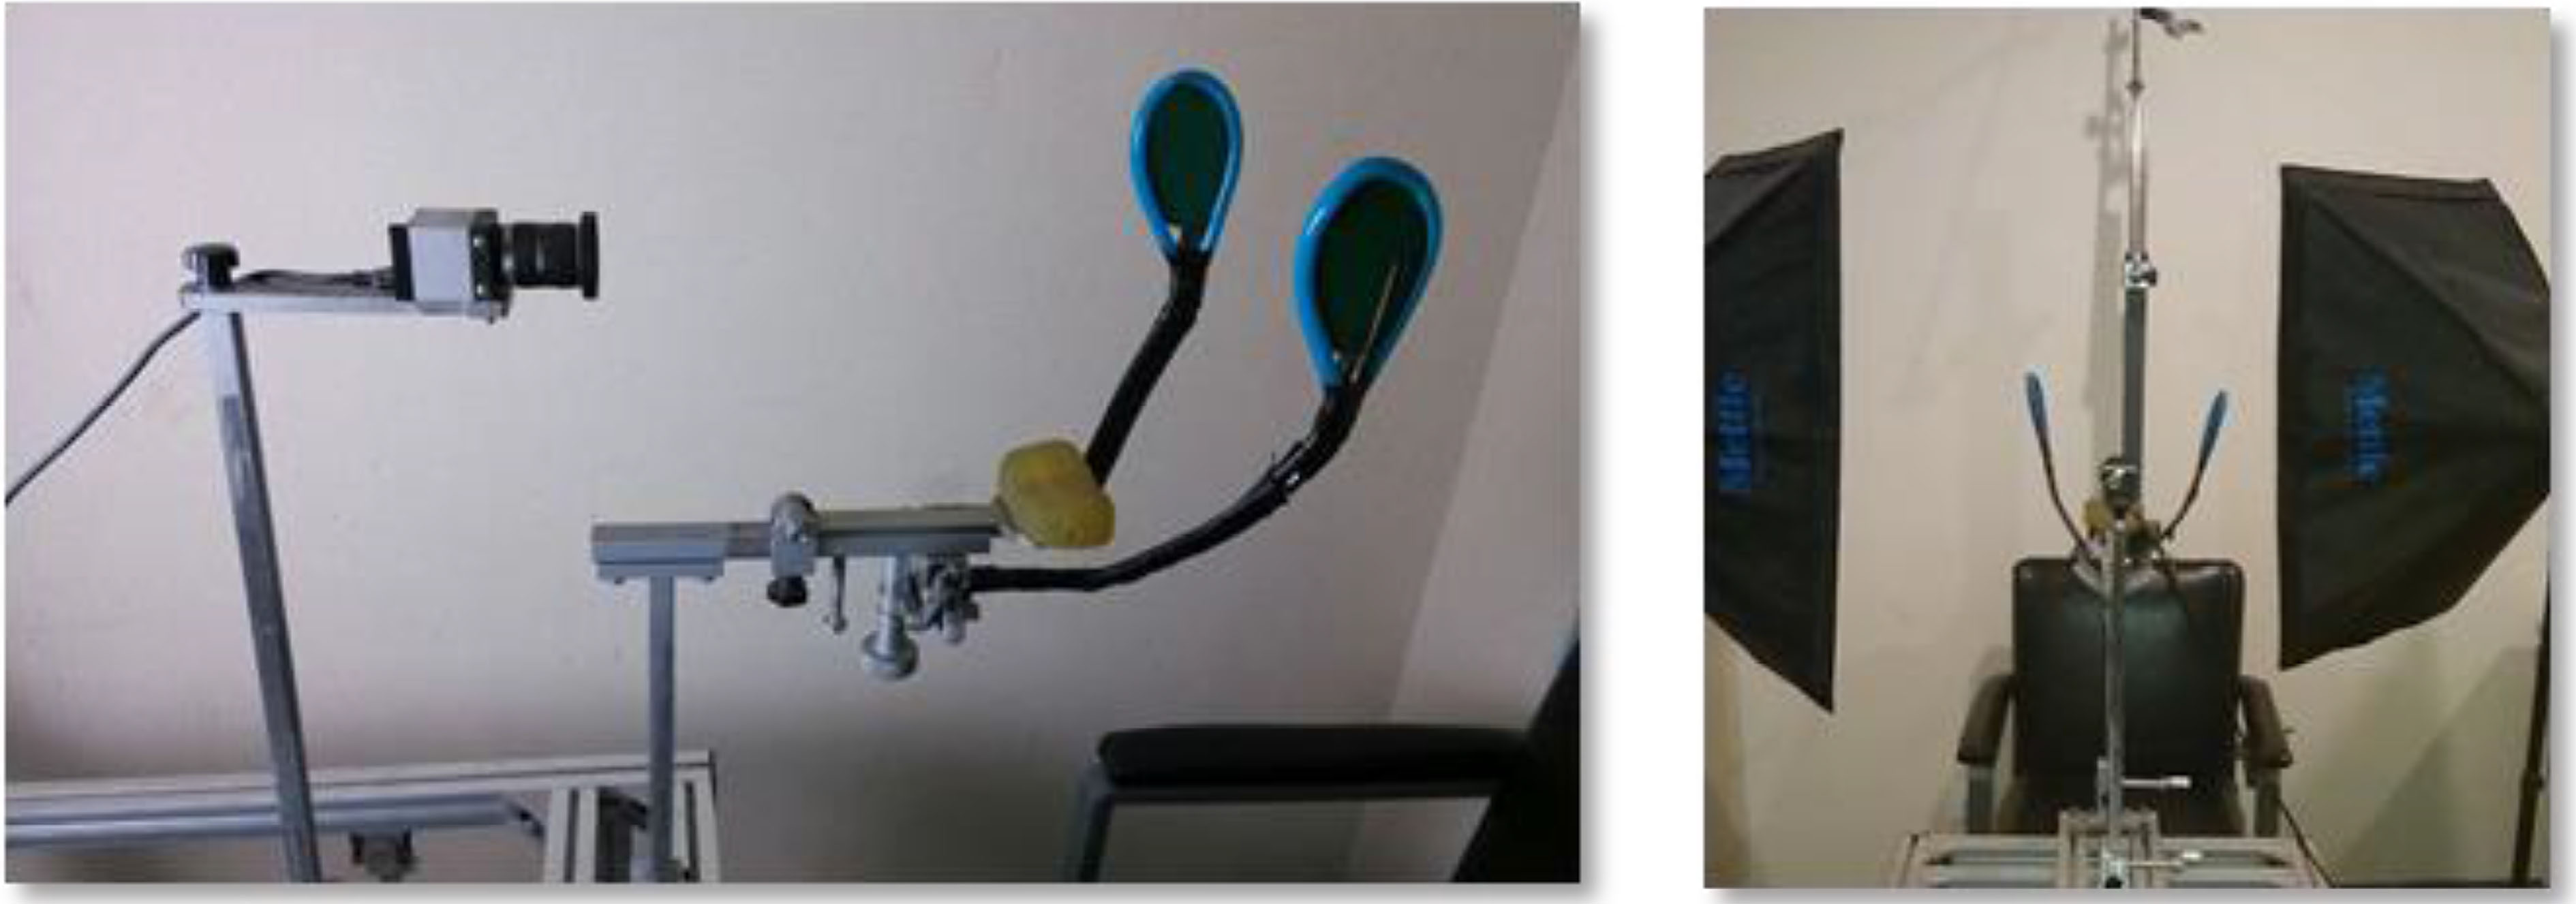 The equipment used for facial paralysis image acquisition.